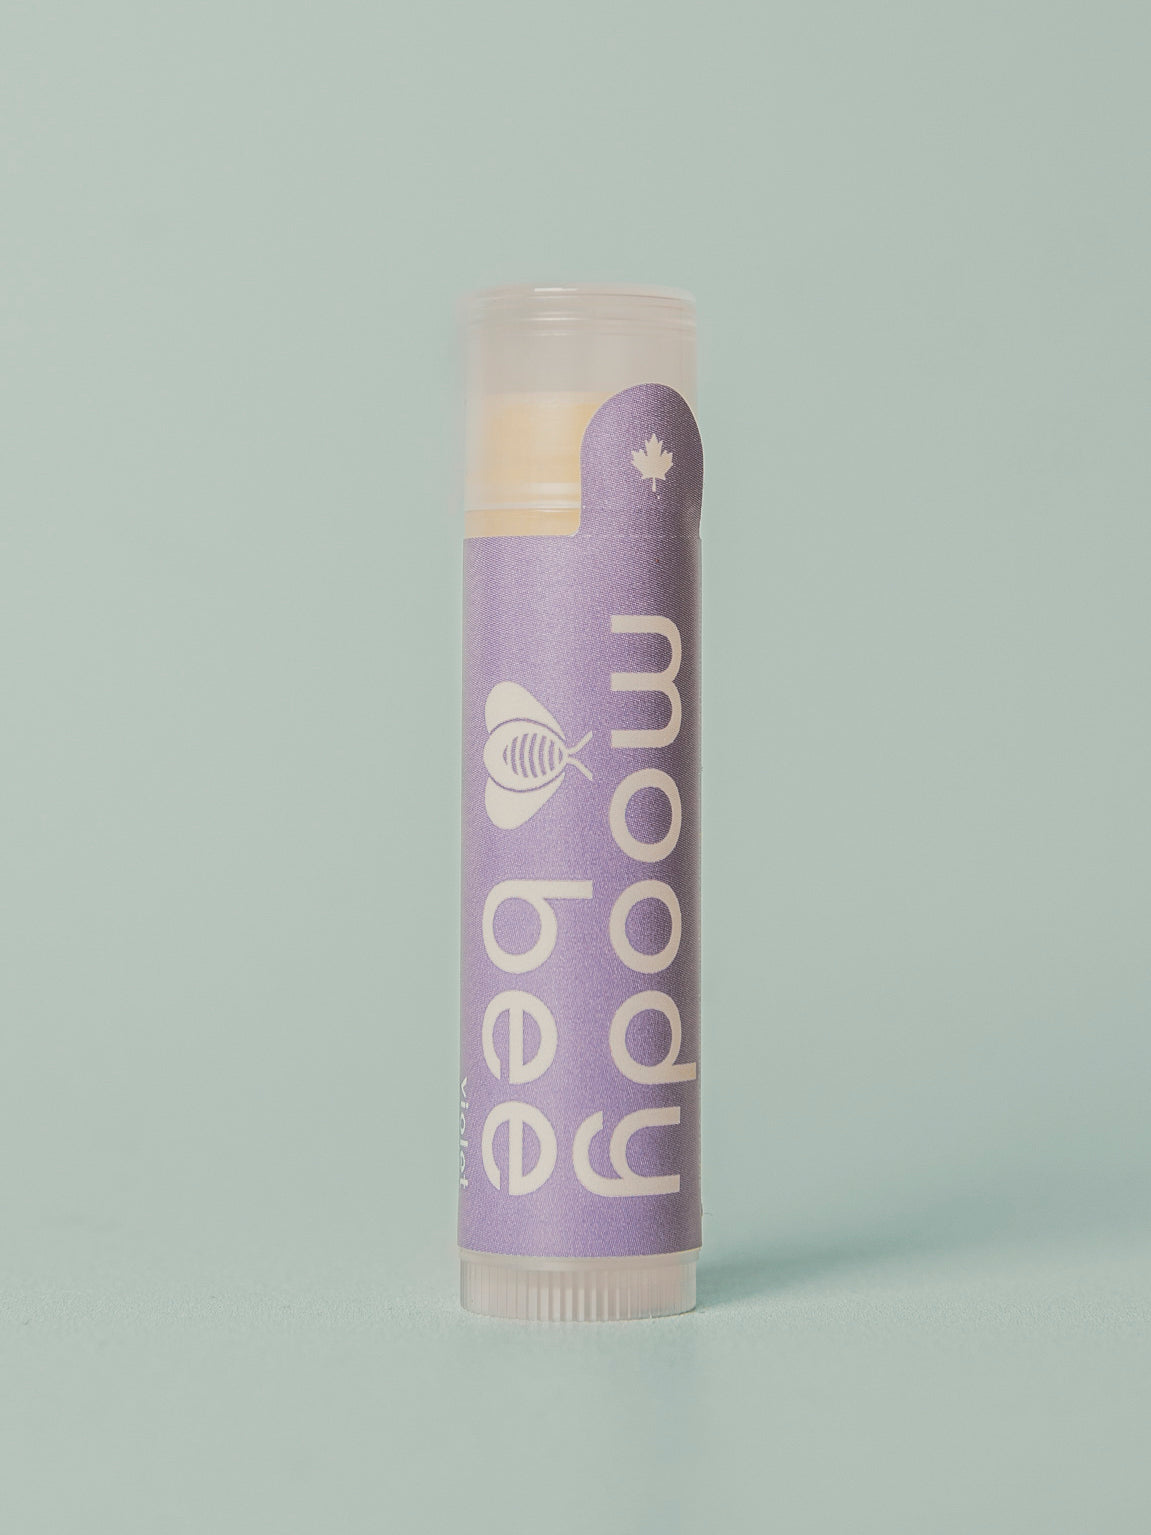 lavender london fog - lip balm of the month. 40% off, excluded from volume discounts.